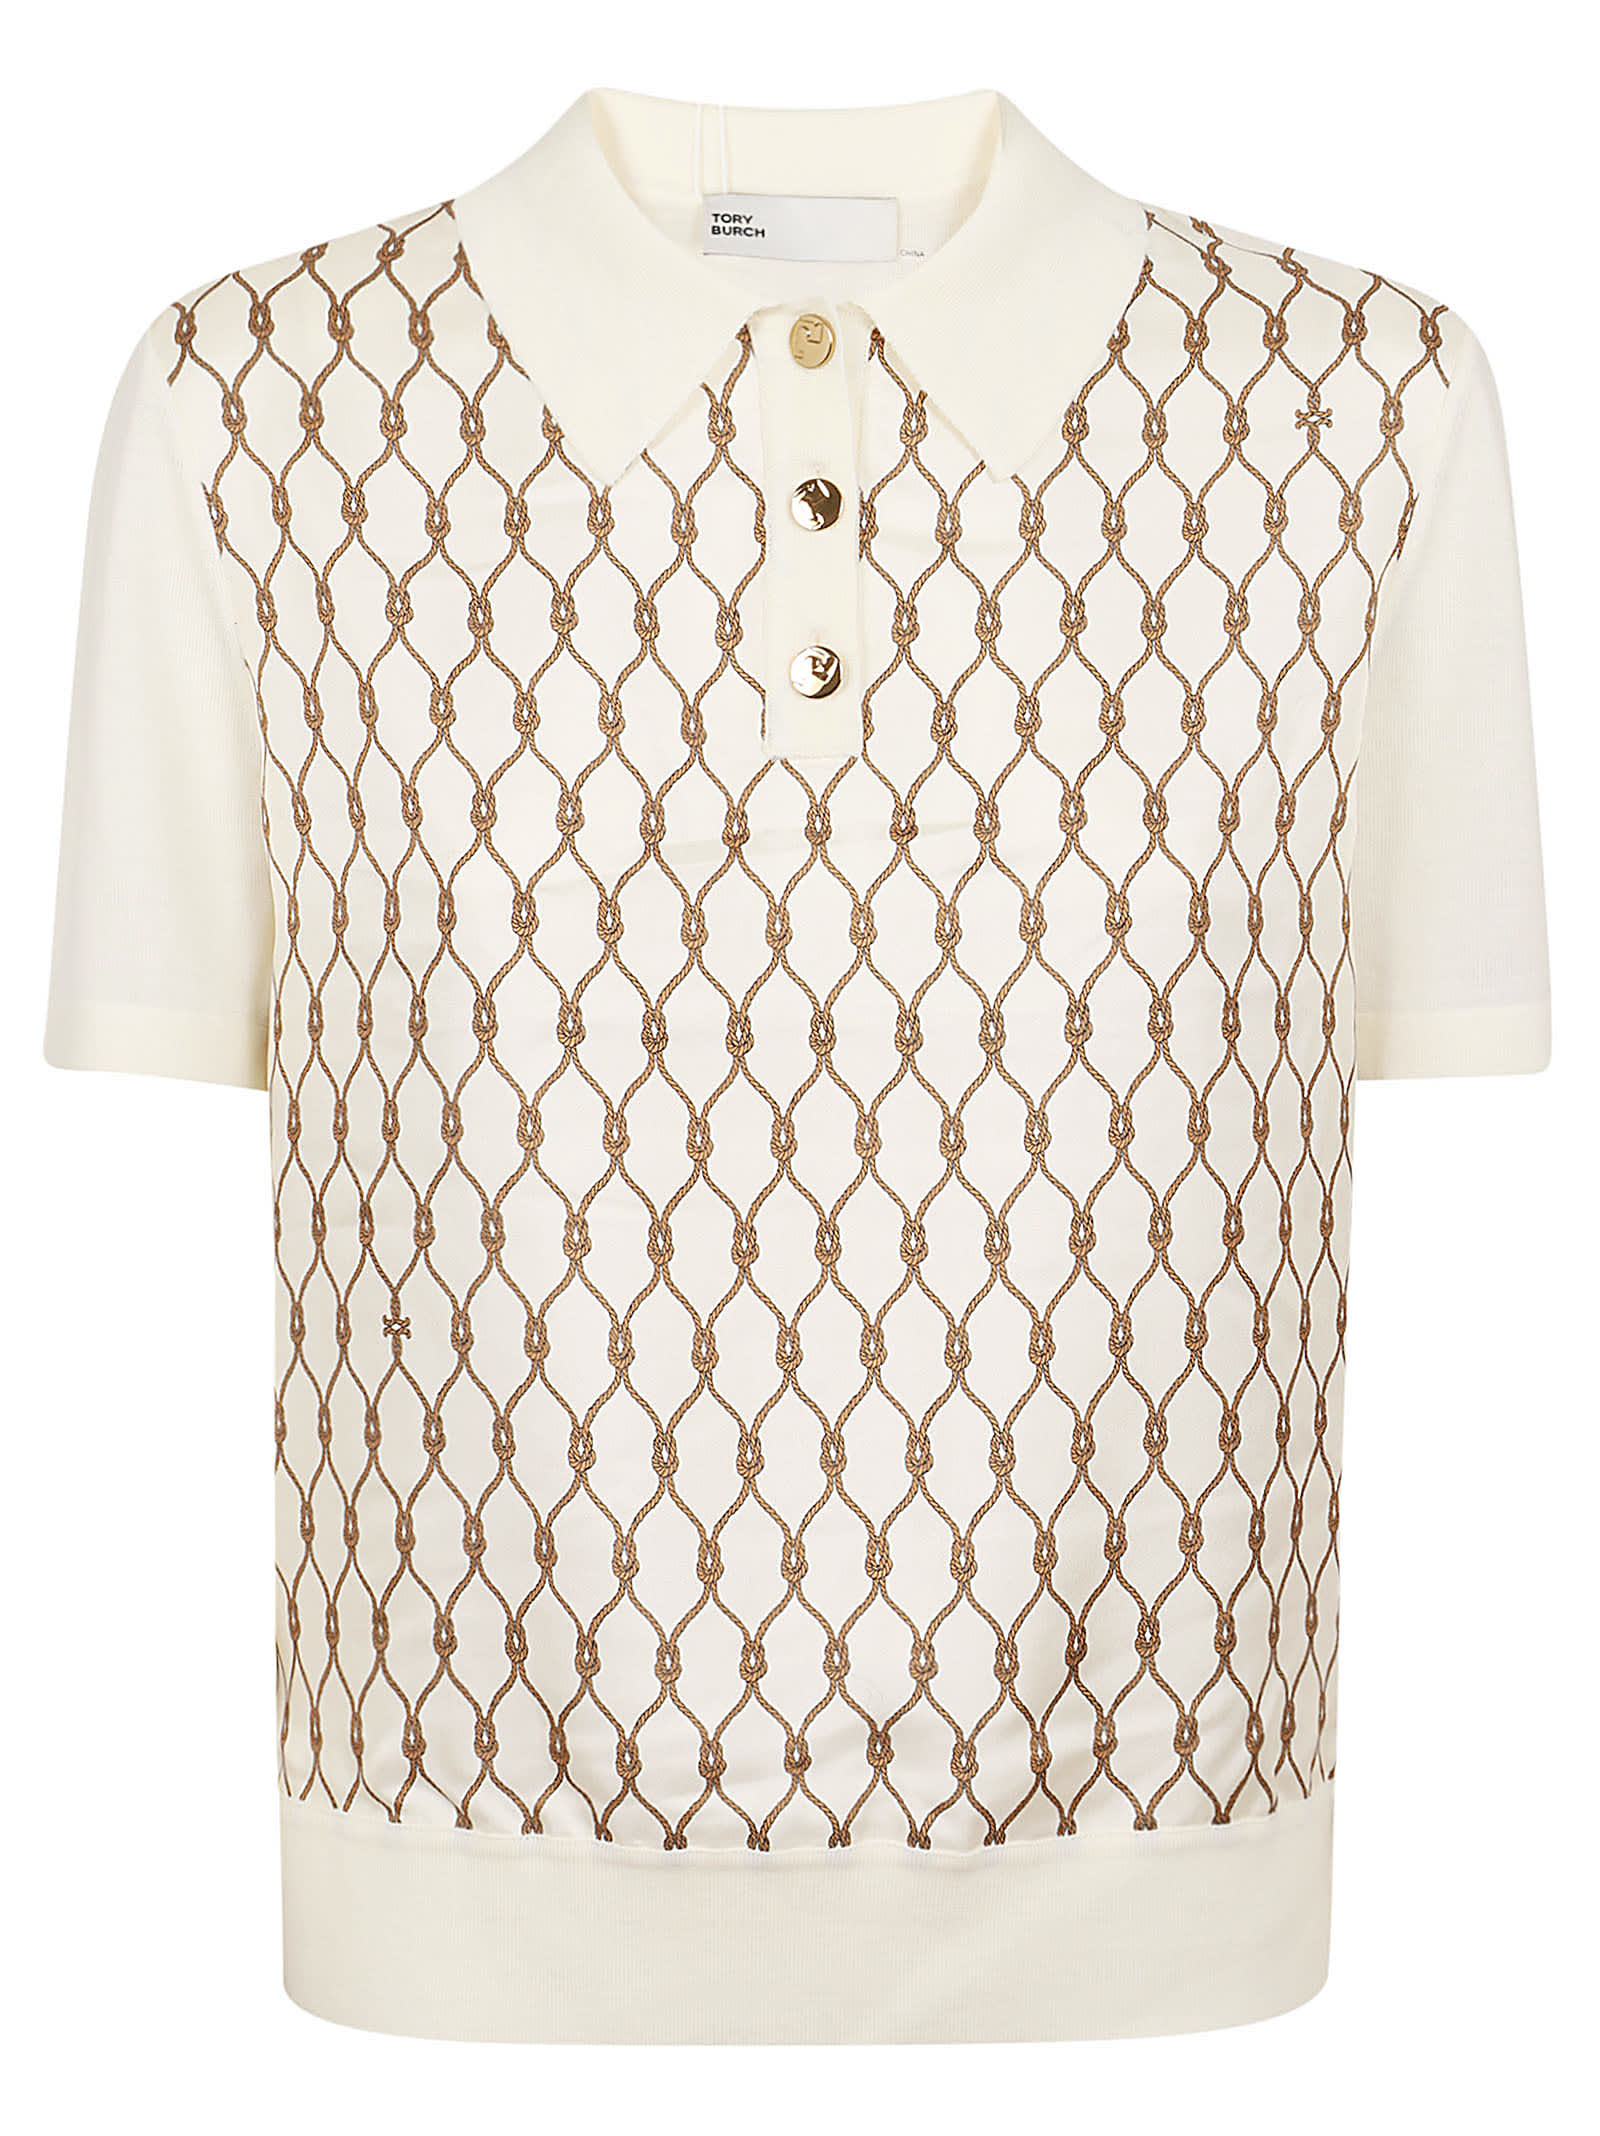 TORY BURCH SILK FRONT POLO